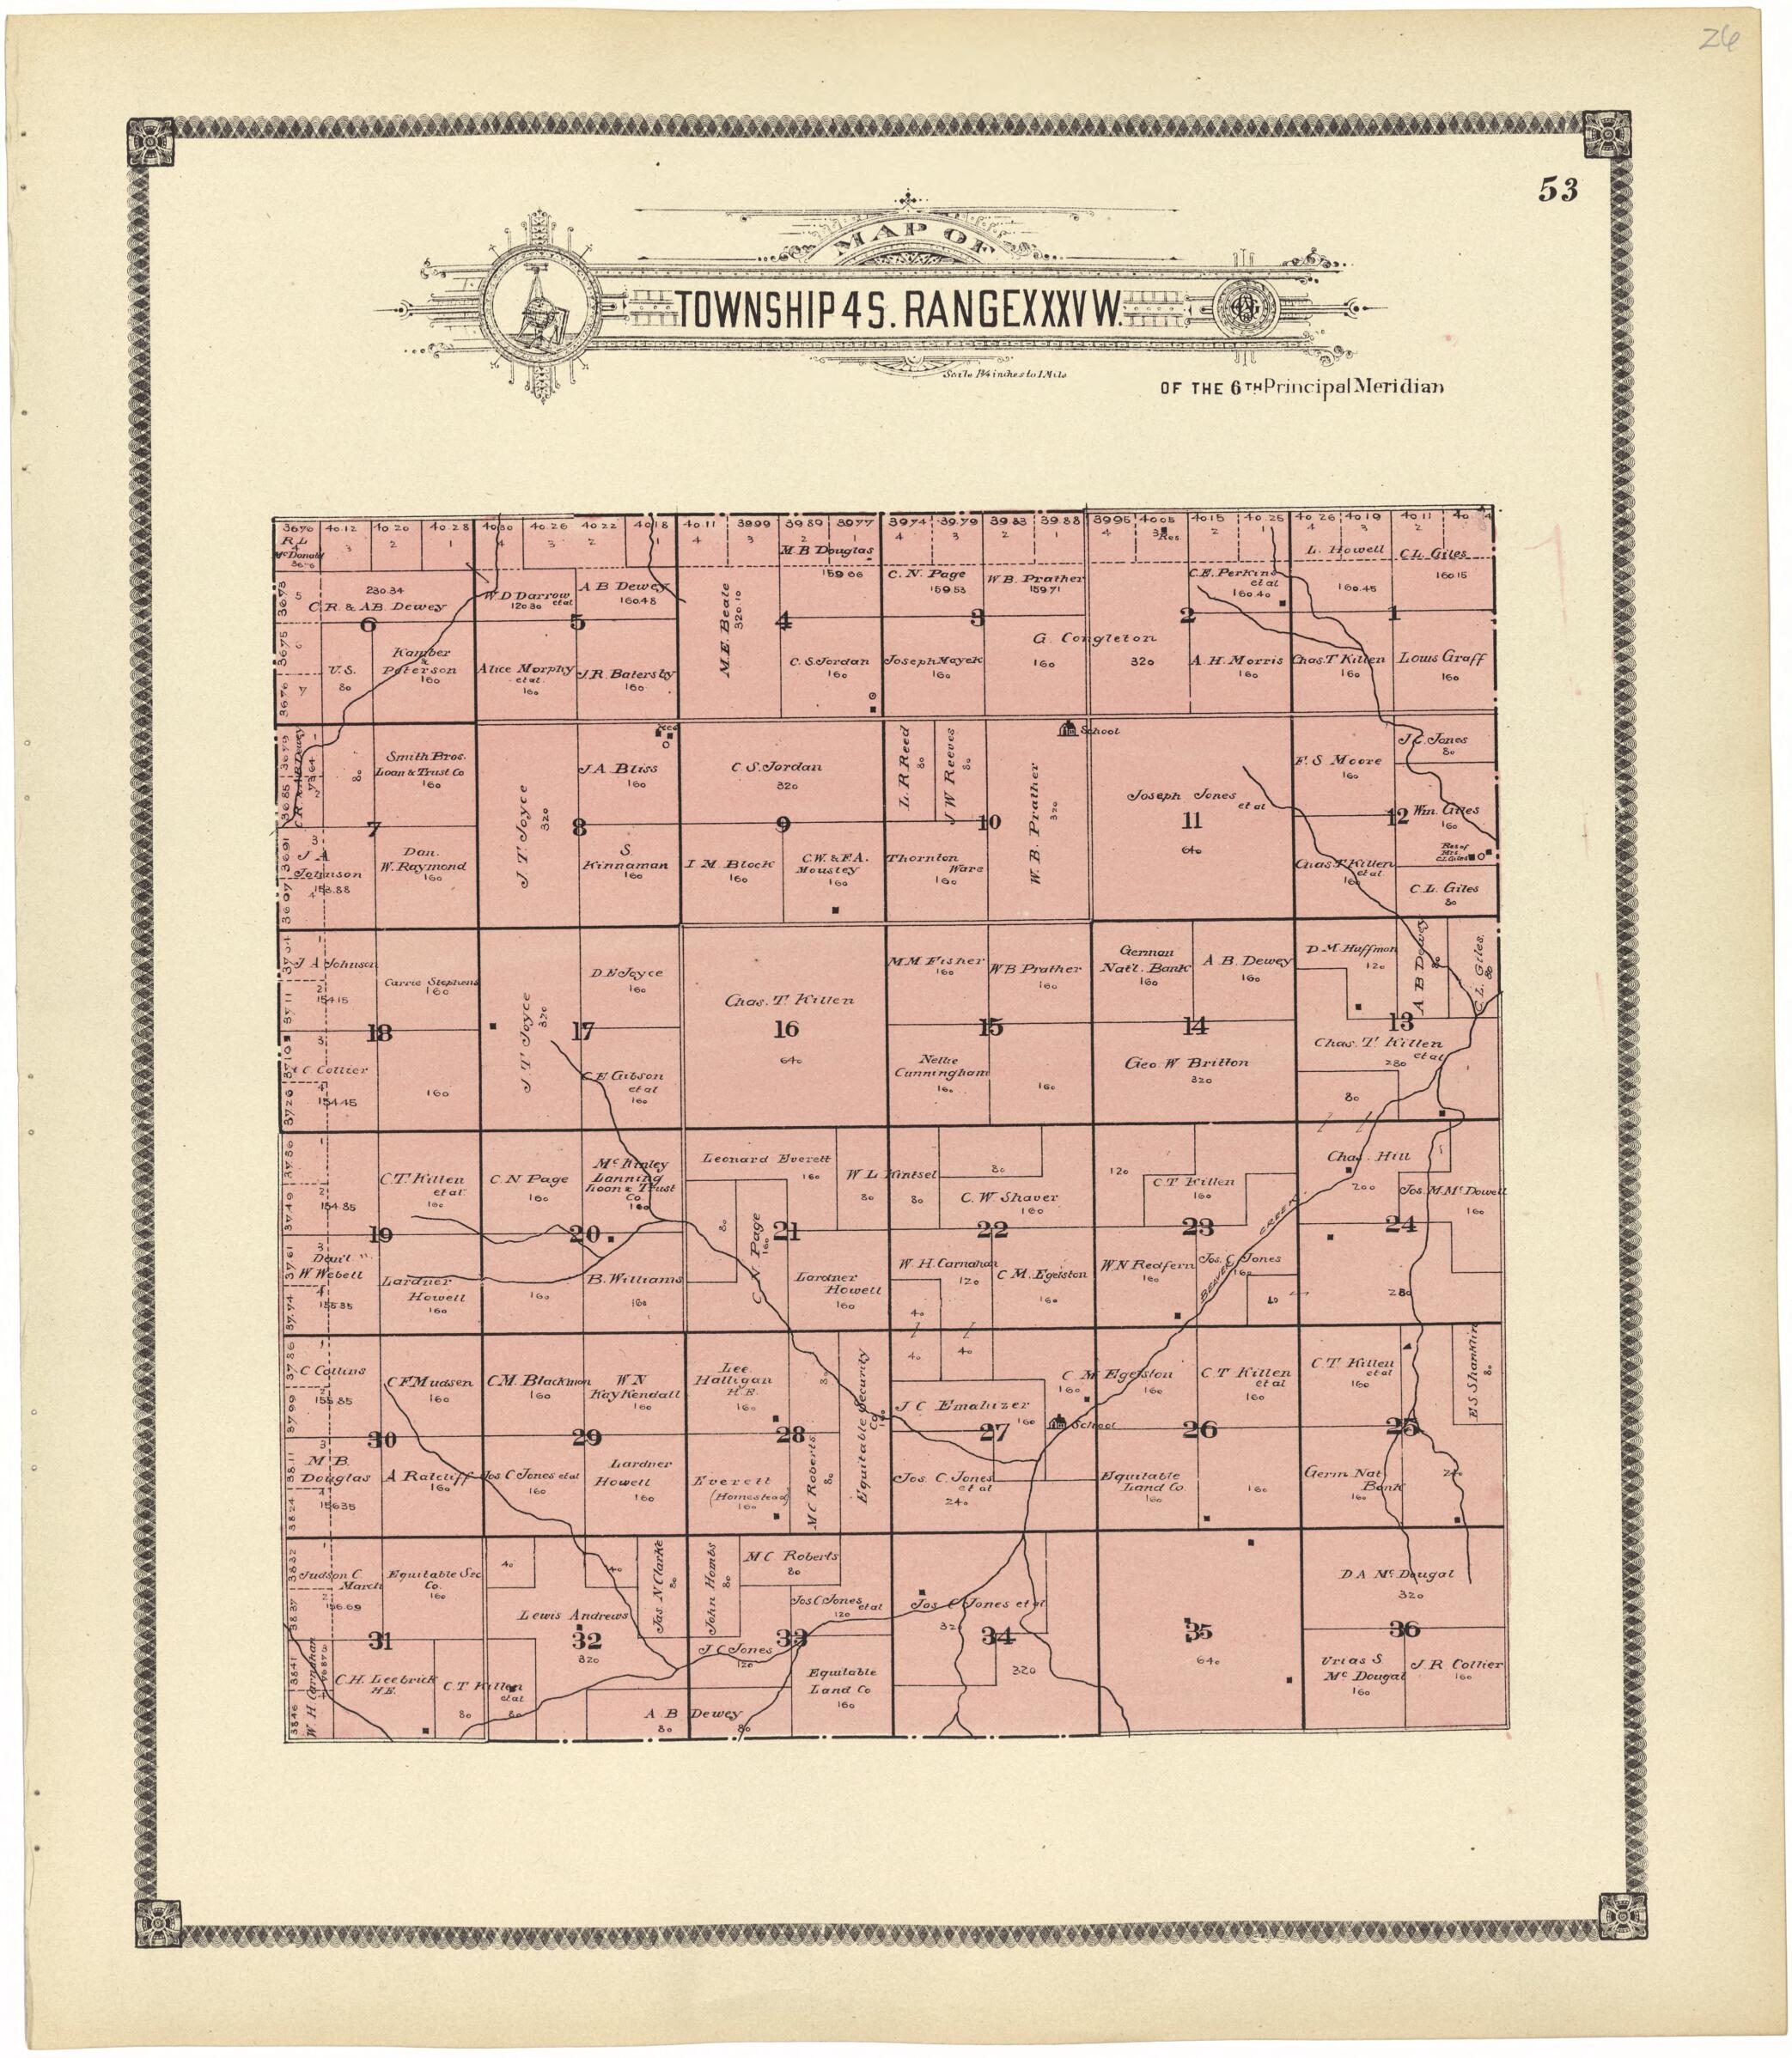 This old map of Map of Township 4 S. Range XXXV W. from Standard Atlas of Rawlins County, Kansas from 1906 was created by  Geo. A. Ogle &amp; Co in 1906